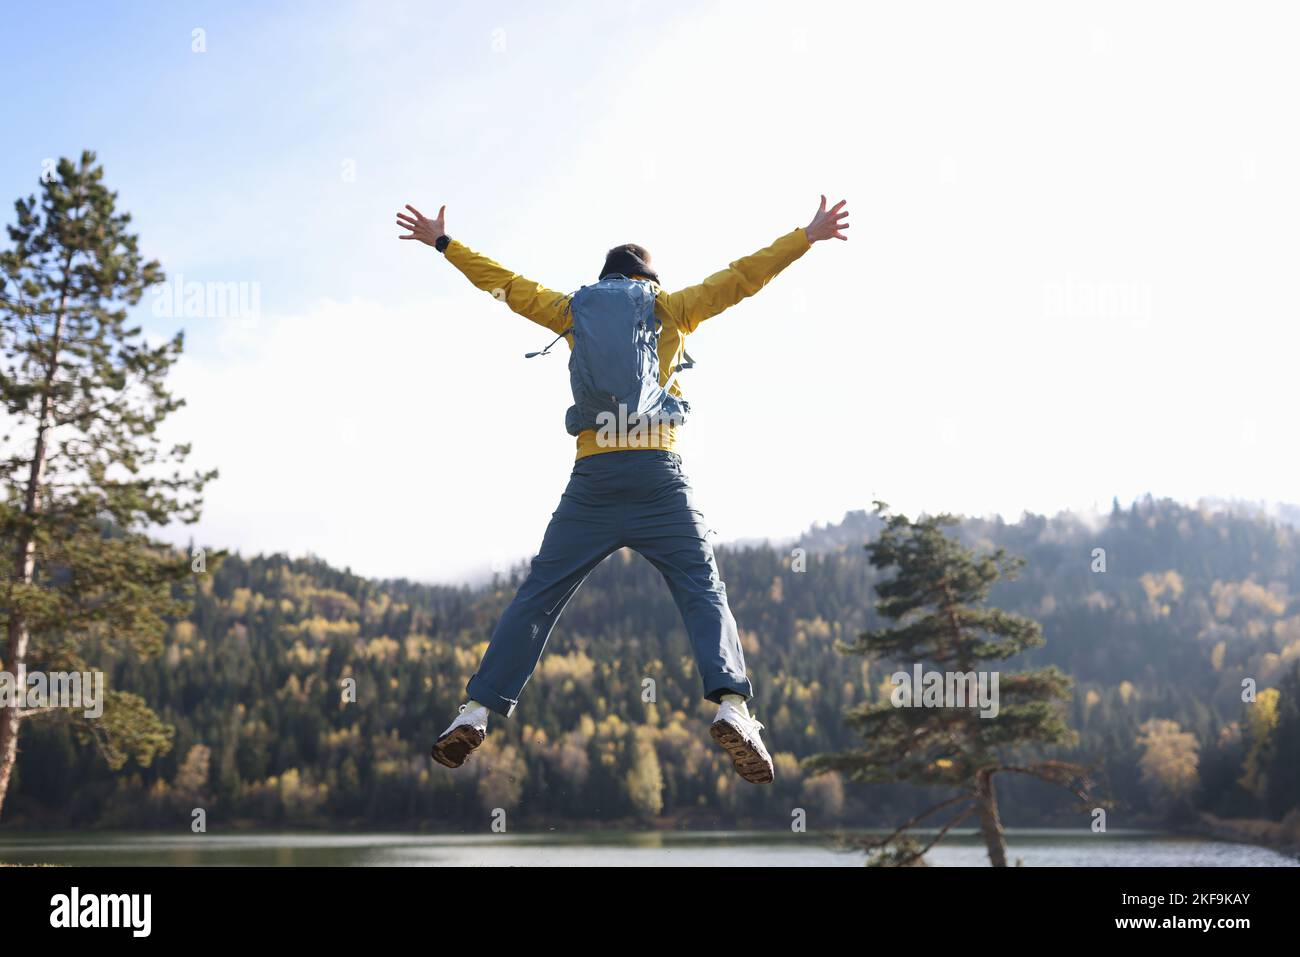 Happy man with open arms jumping, lake and mountains in background. Stock Photo